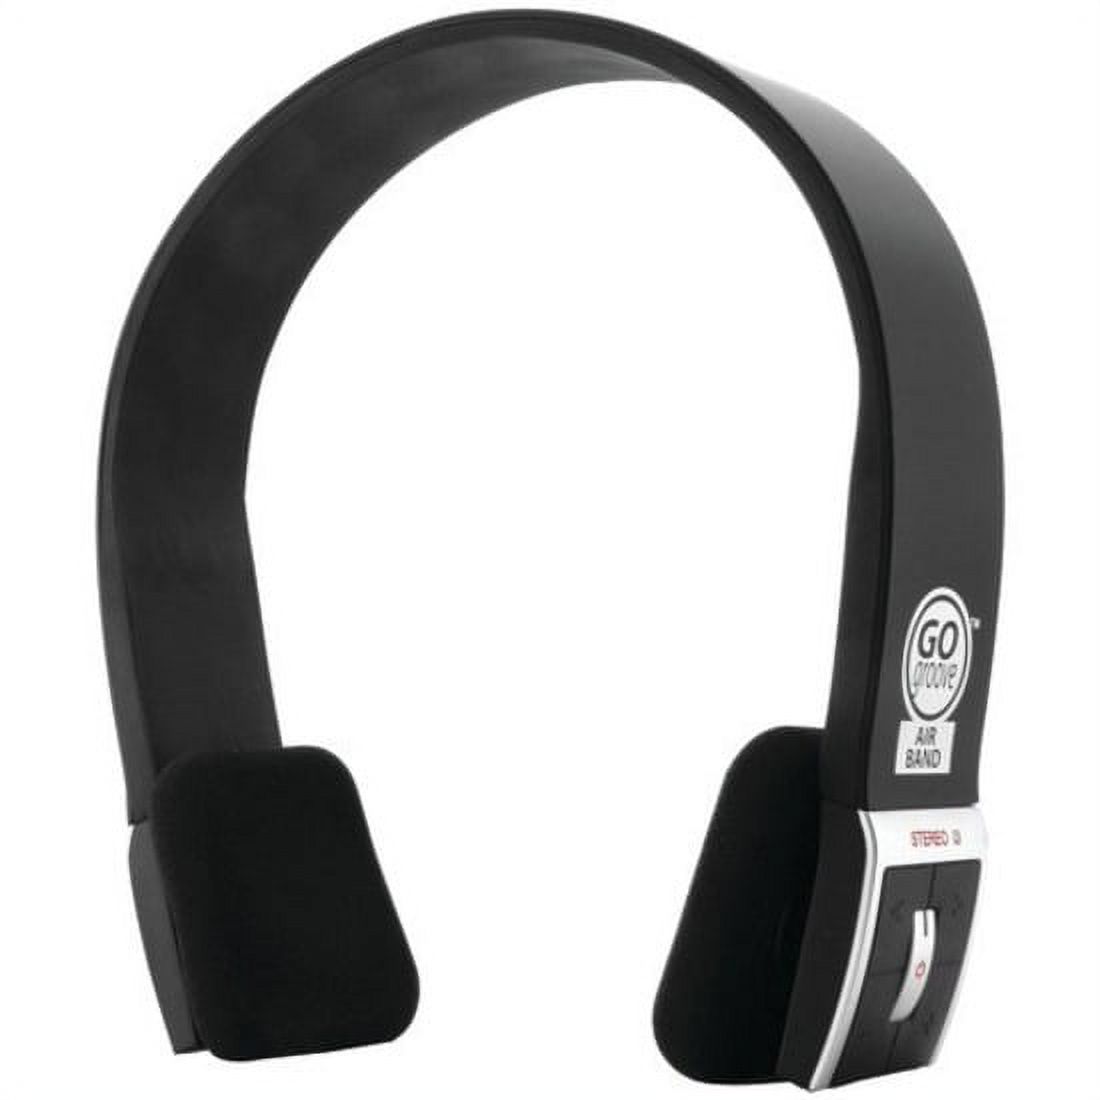 GOgroove BlueVIBE Airband Bluetooth Over-Ear Stereo Headphones - image 1 of 3